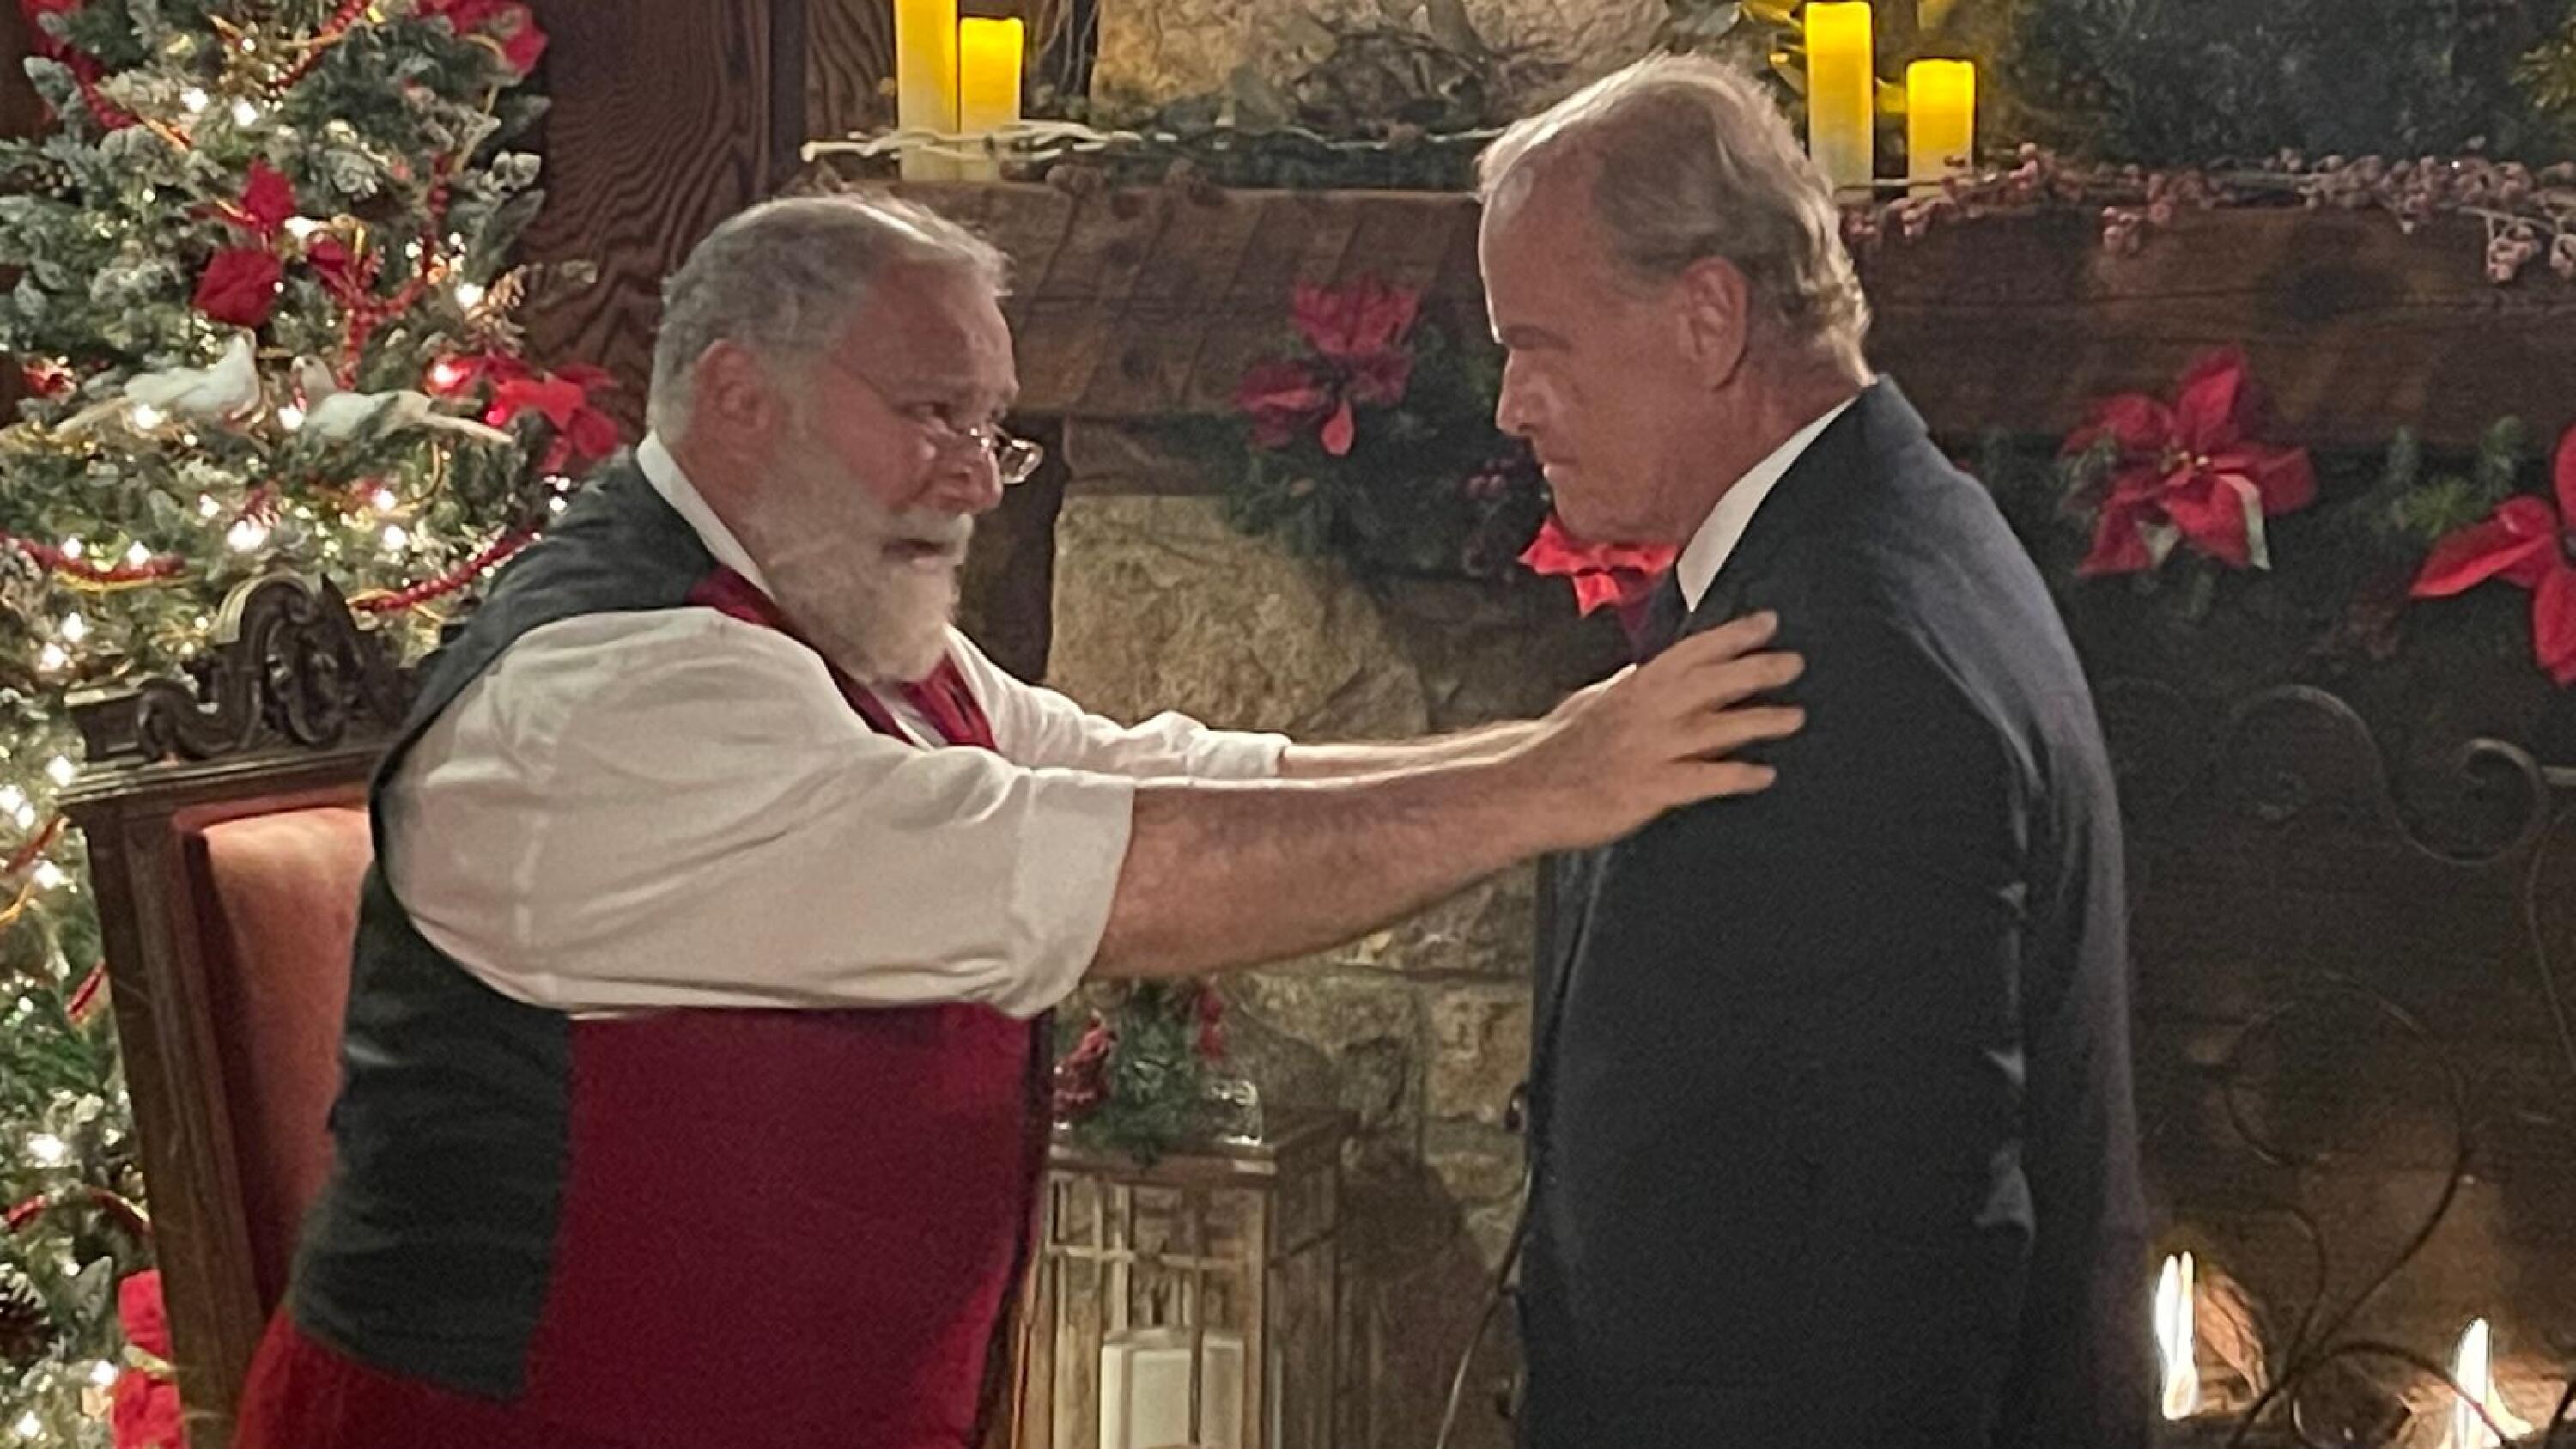 ‘Cheers’ to Christmas: The Kelsey Grammer movie filmed in southeastern Connecticut debuts on Lifetime